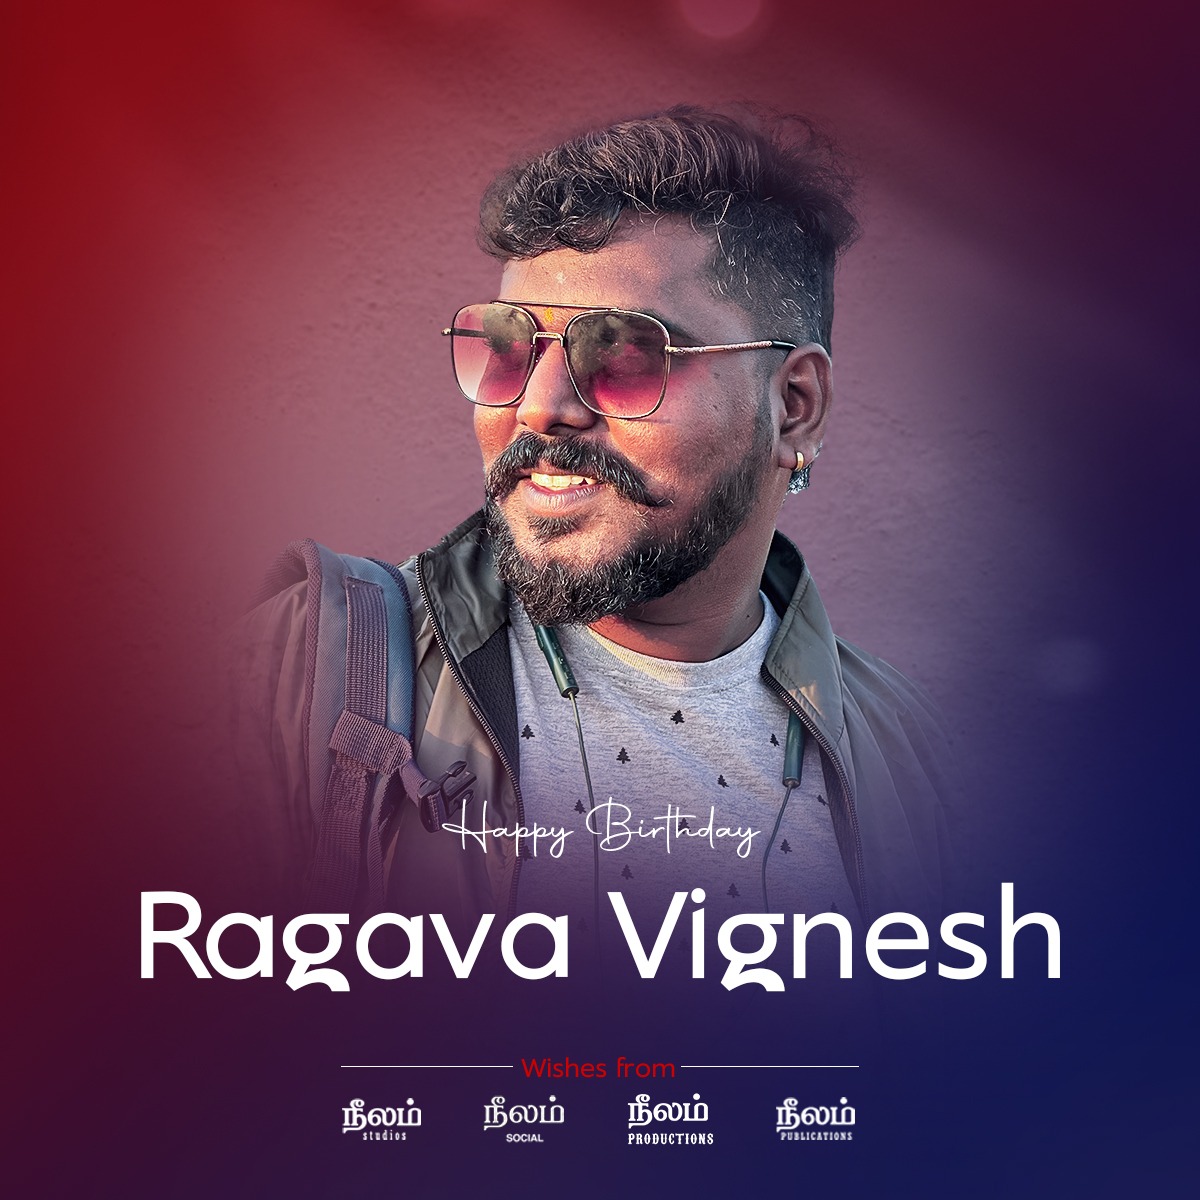 Wishing one of our own, our dearest and dedicated @Ragavavignesh1 a many happy returns 💙 Happy Birthday #RagavaVignesh #HBDRagavaVignesh